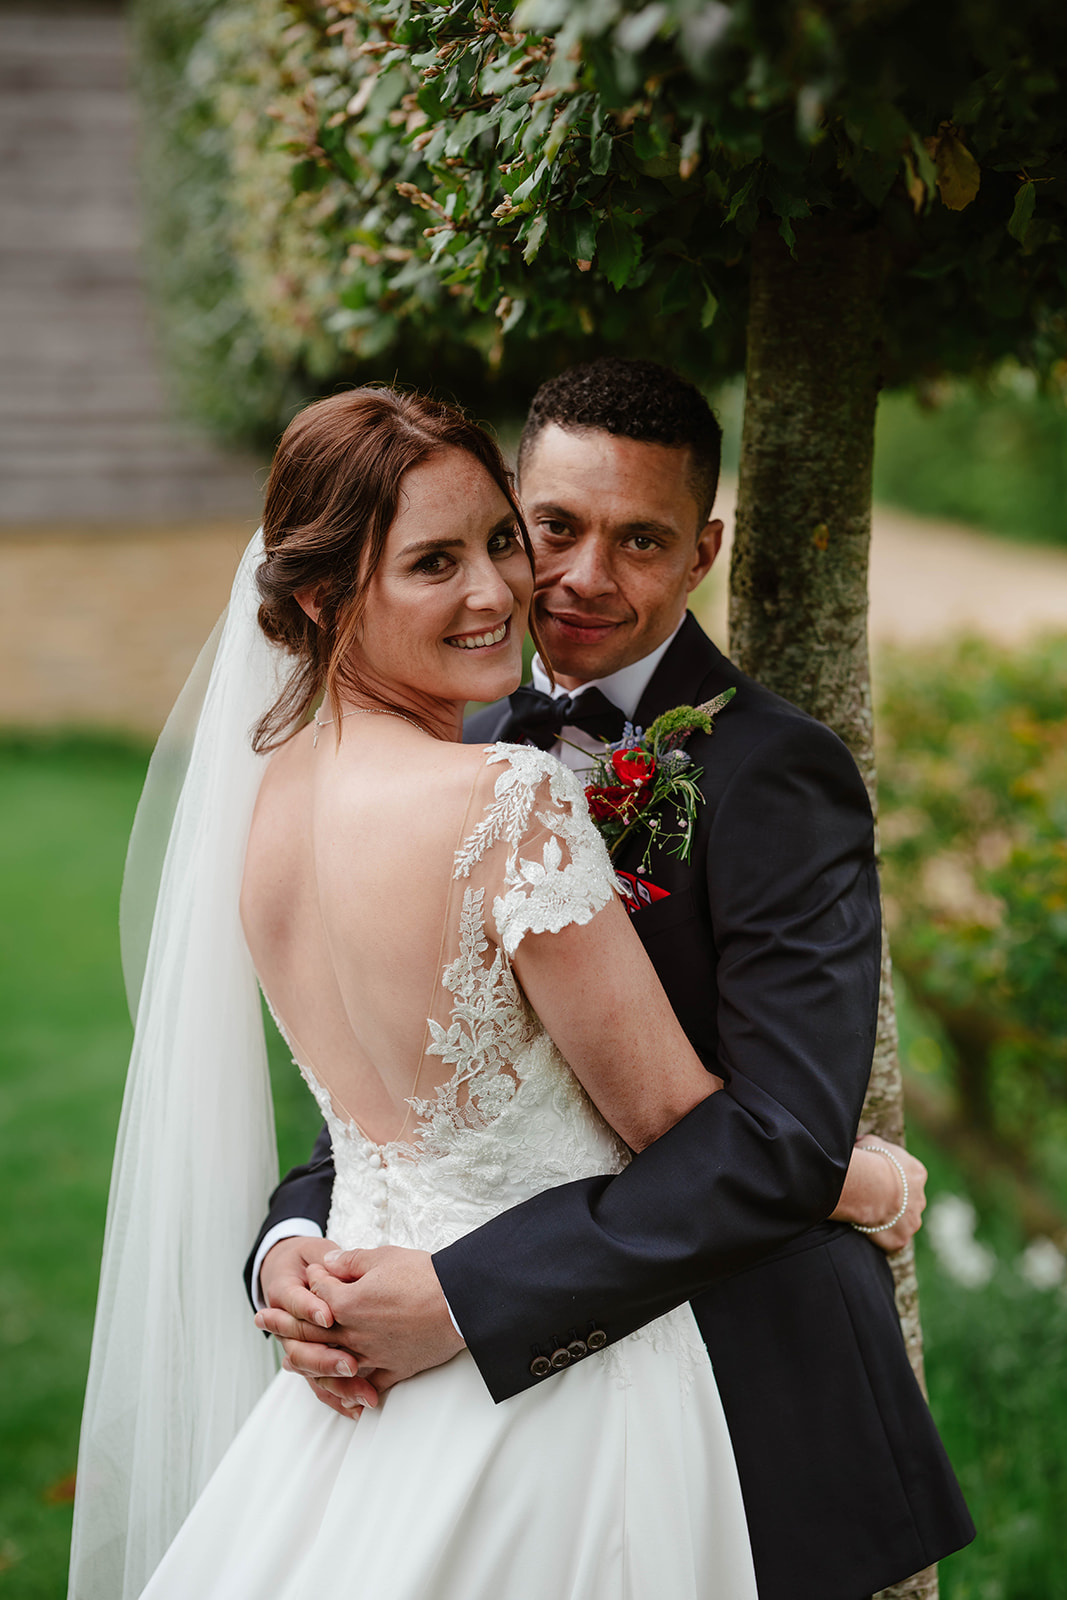 Bride and Groom embracing next to trees